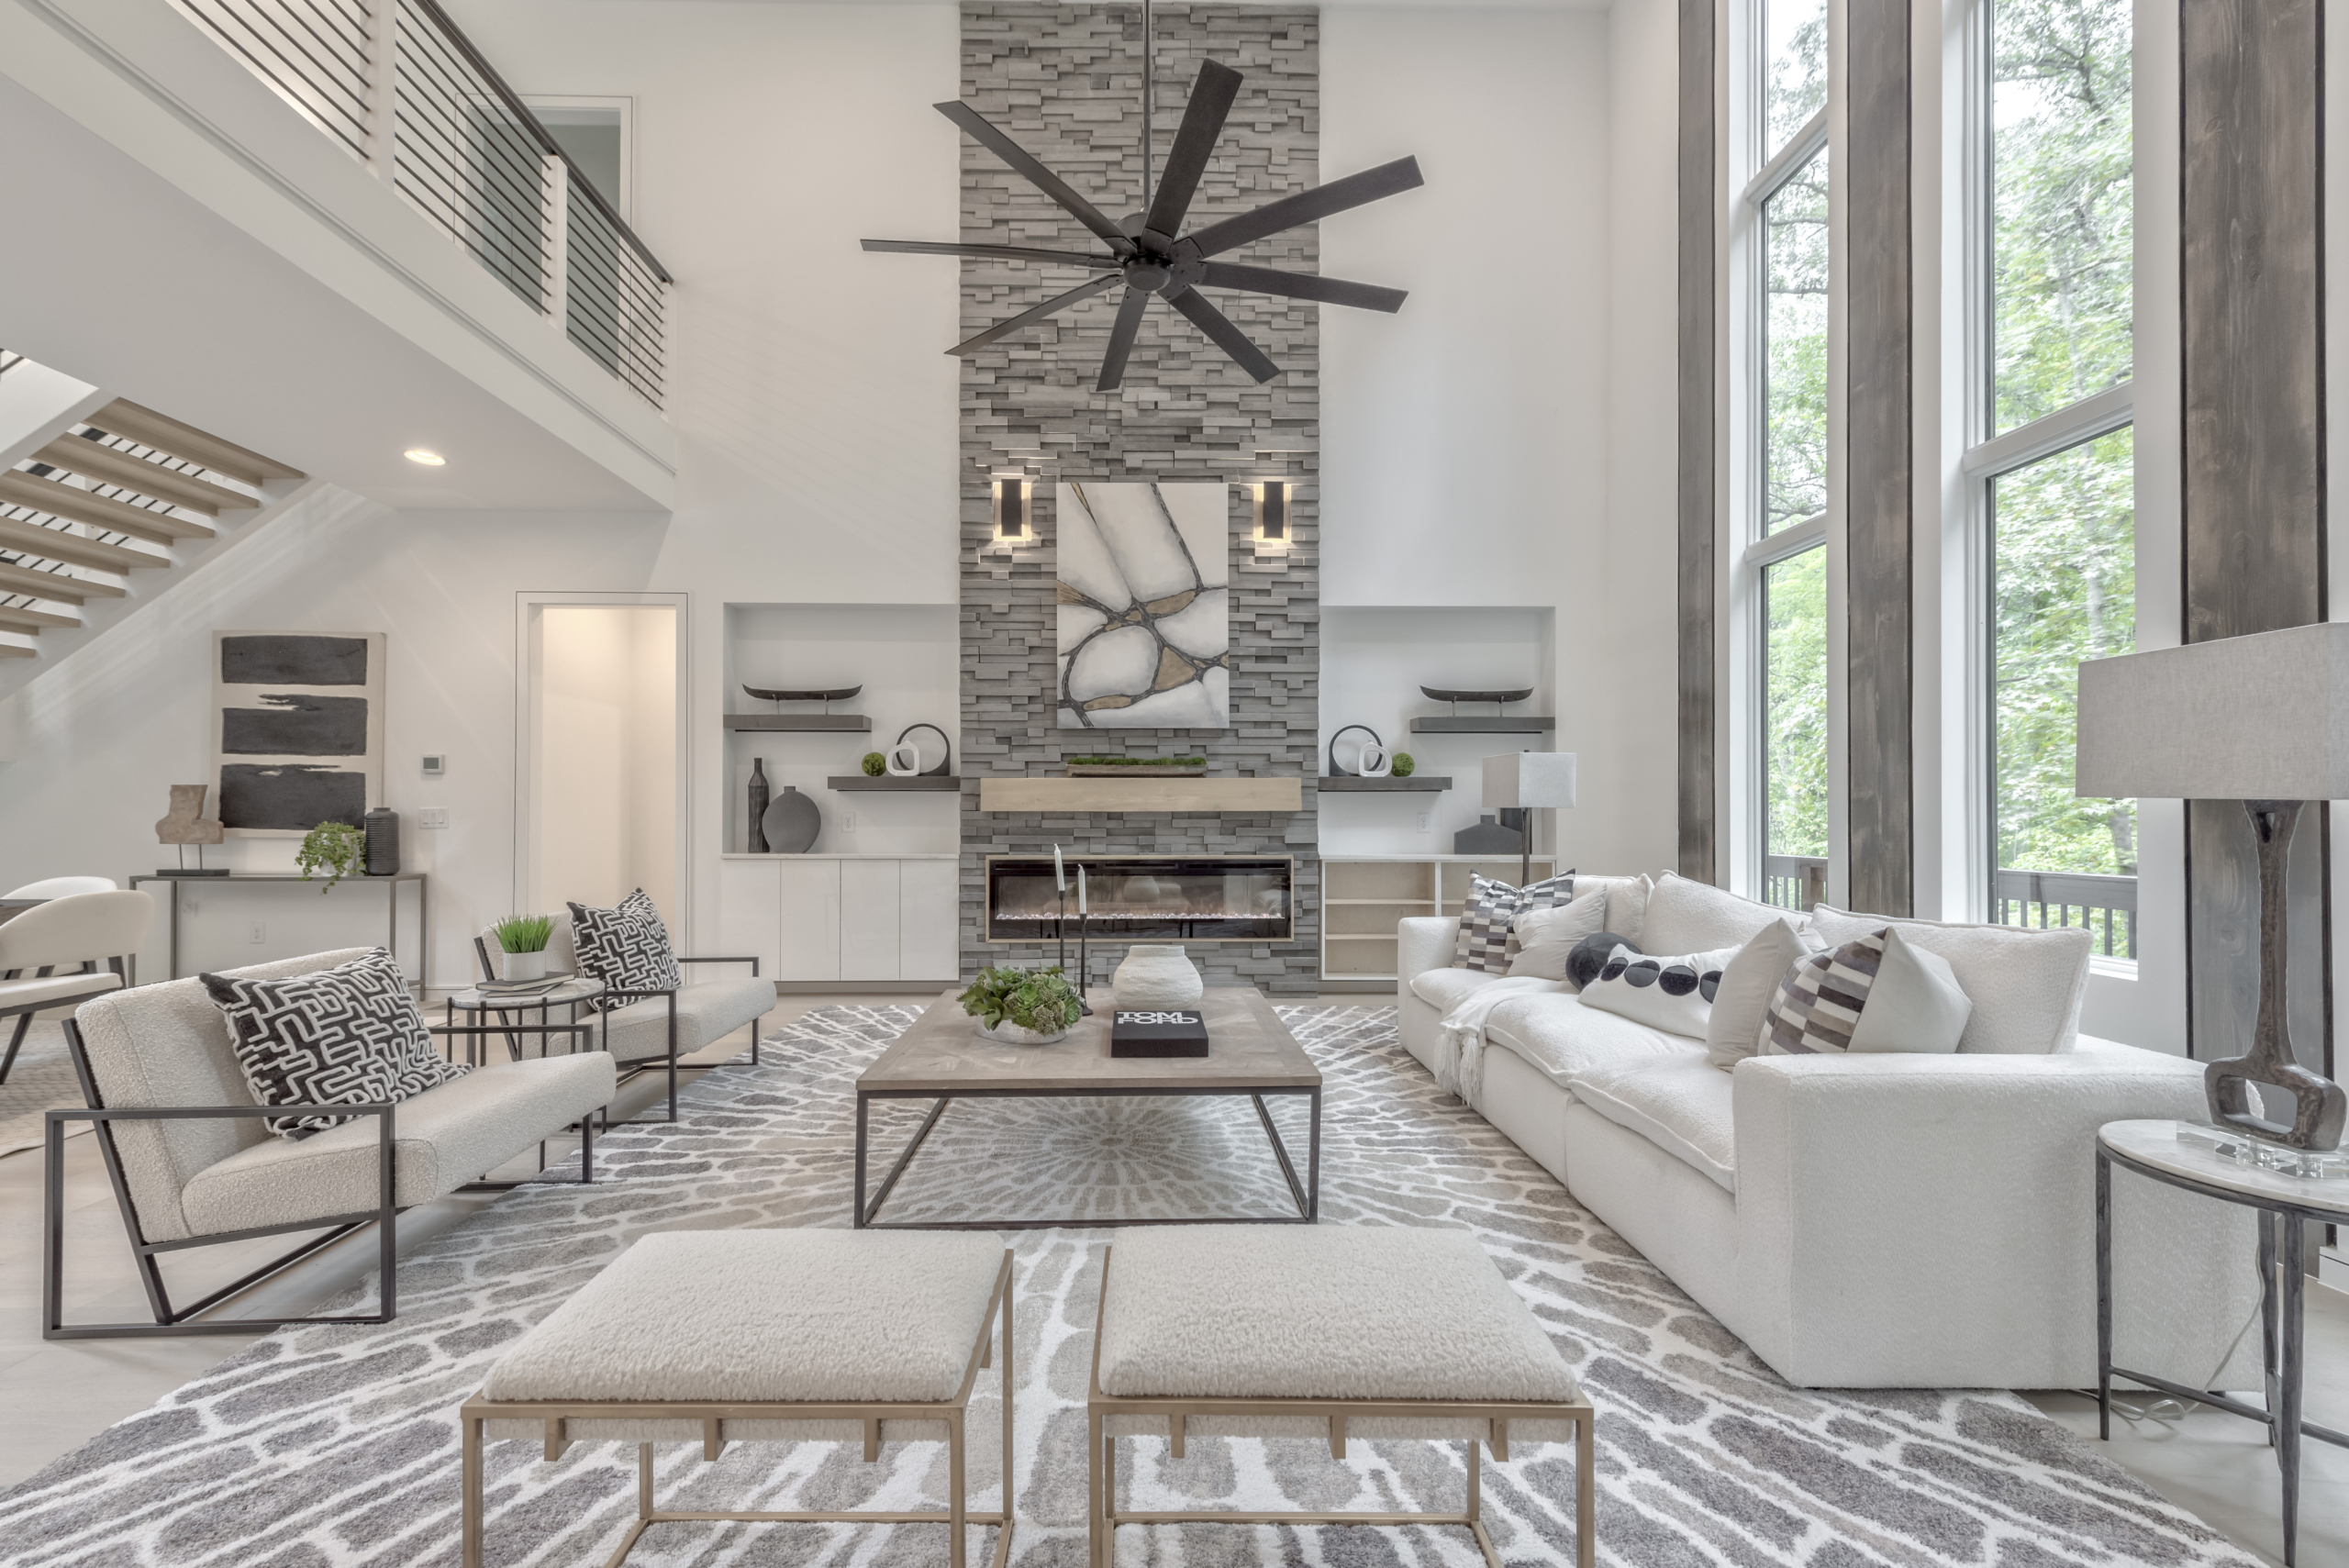 Modern gray and white living room with floor to ceiling windows, high ceilings, and inset fireplace with stone wall detail and floating staircase with open catwalk